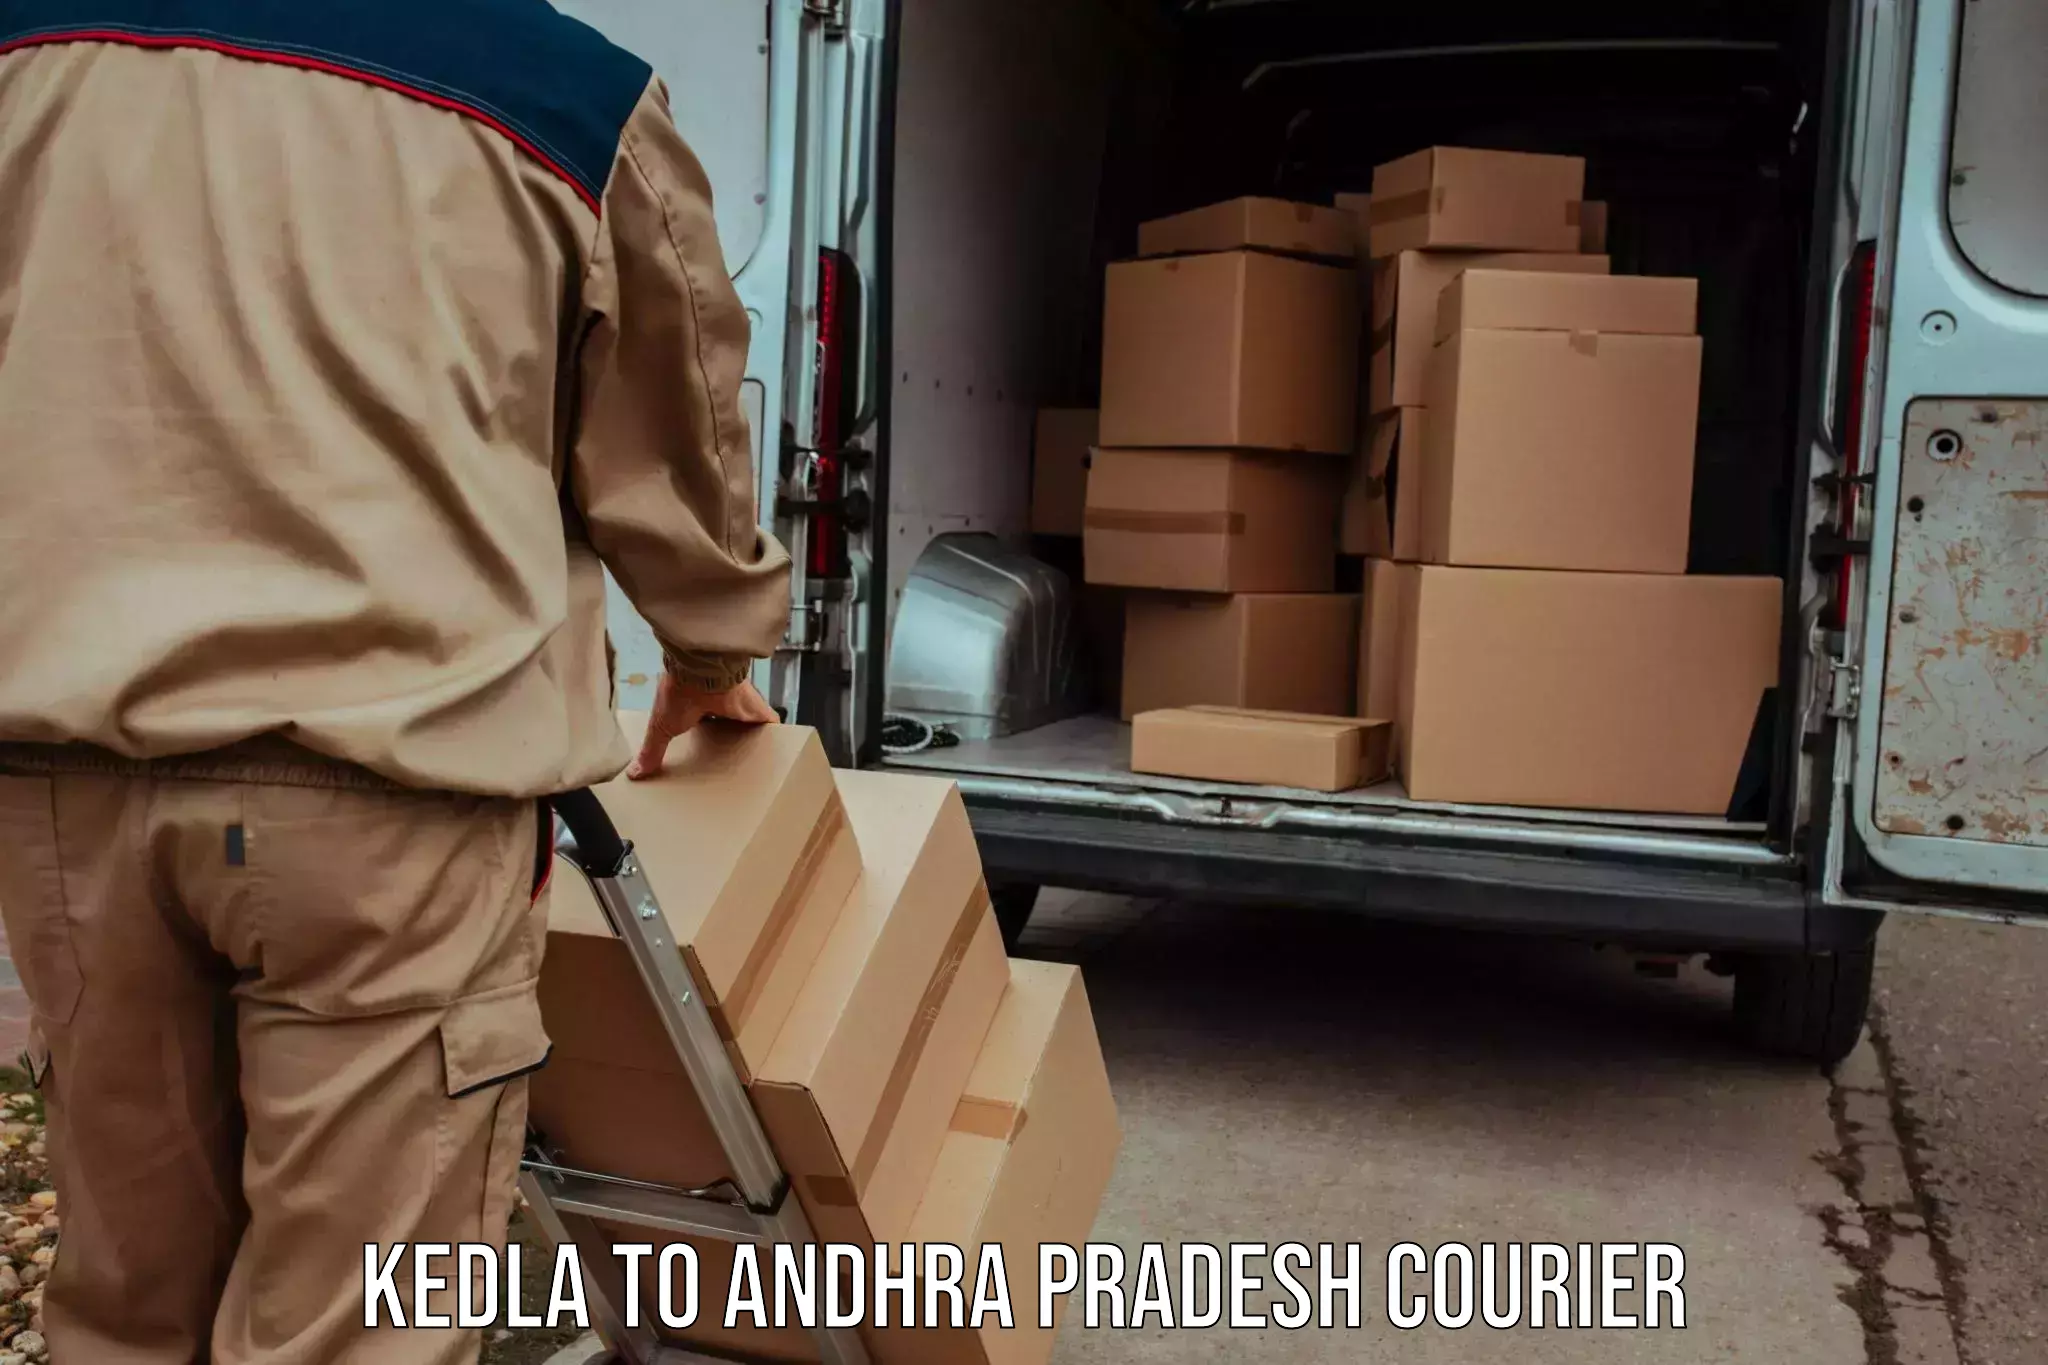 Express delivery network Kedla to Vidyanagar Nellore